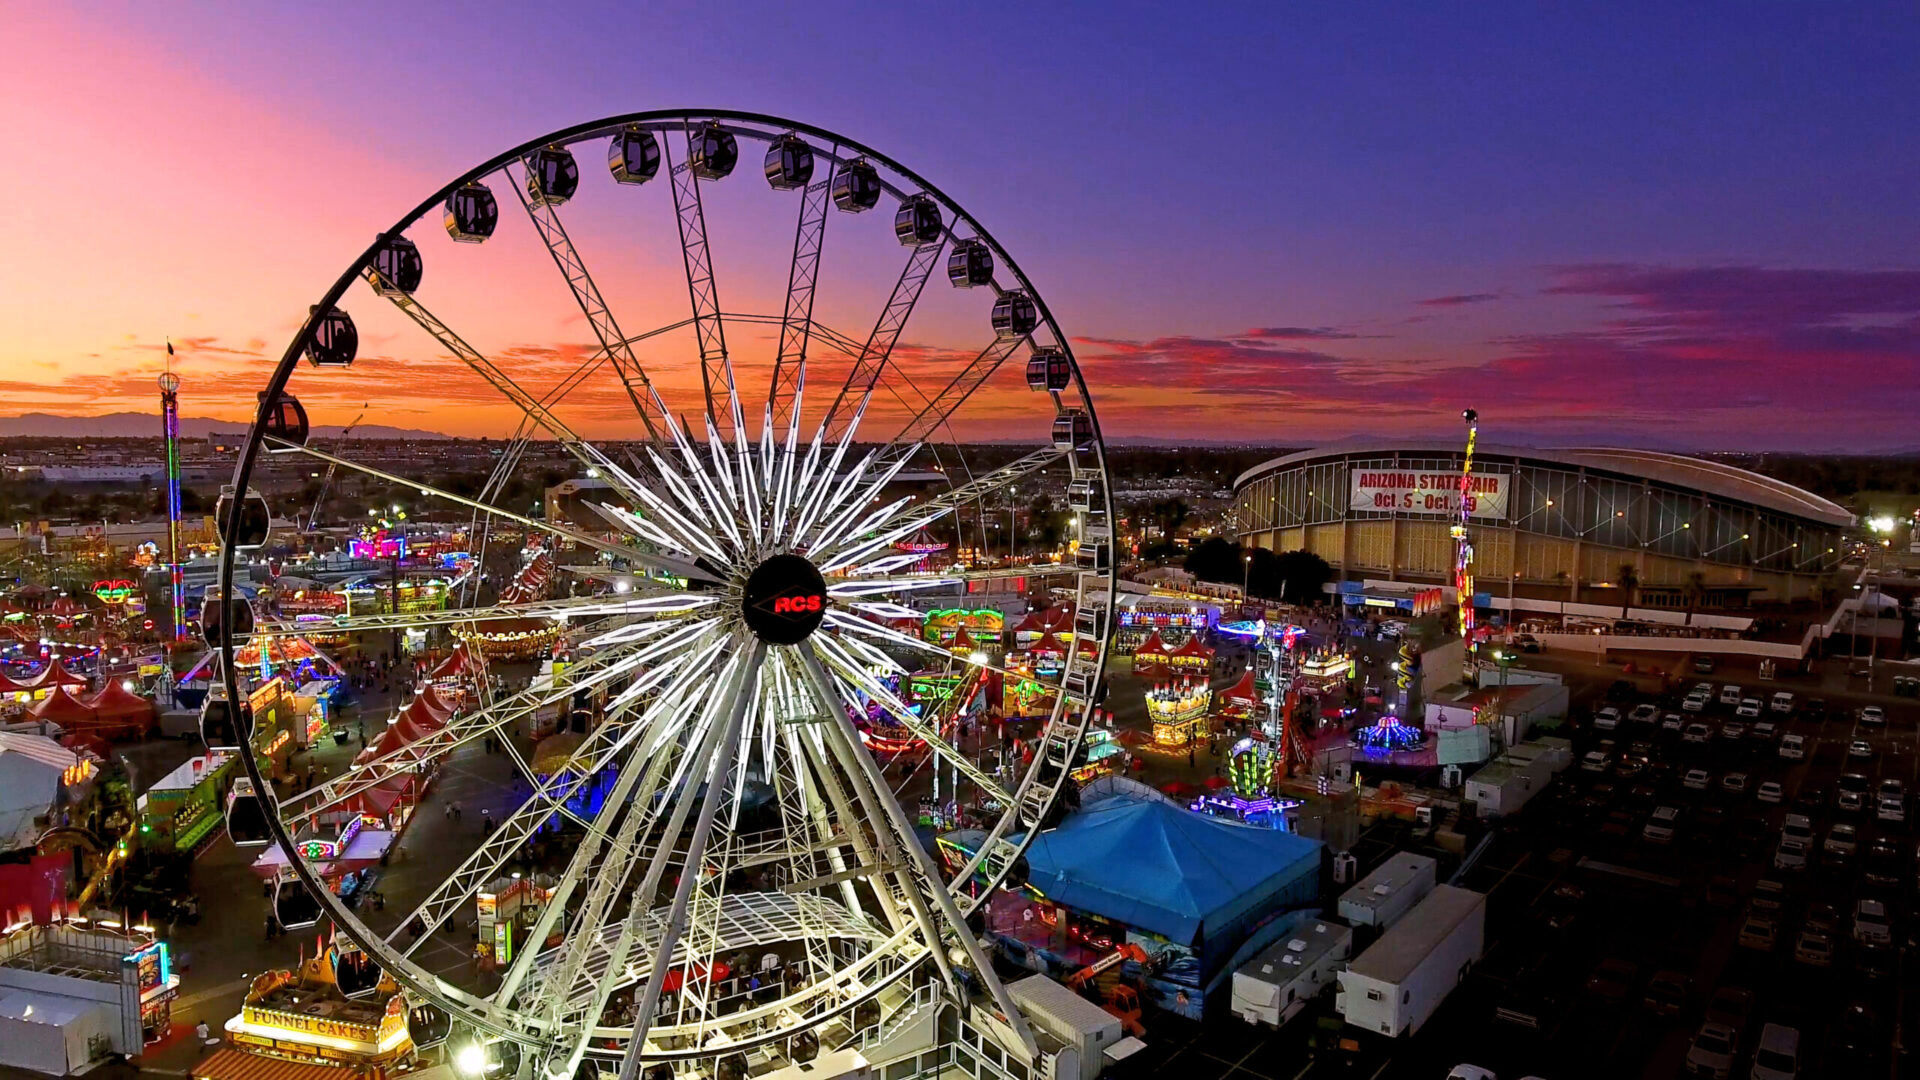 Arizona State Fair for 2021 moving to Wild Horse Pass in West Chandler